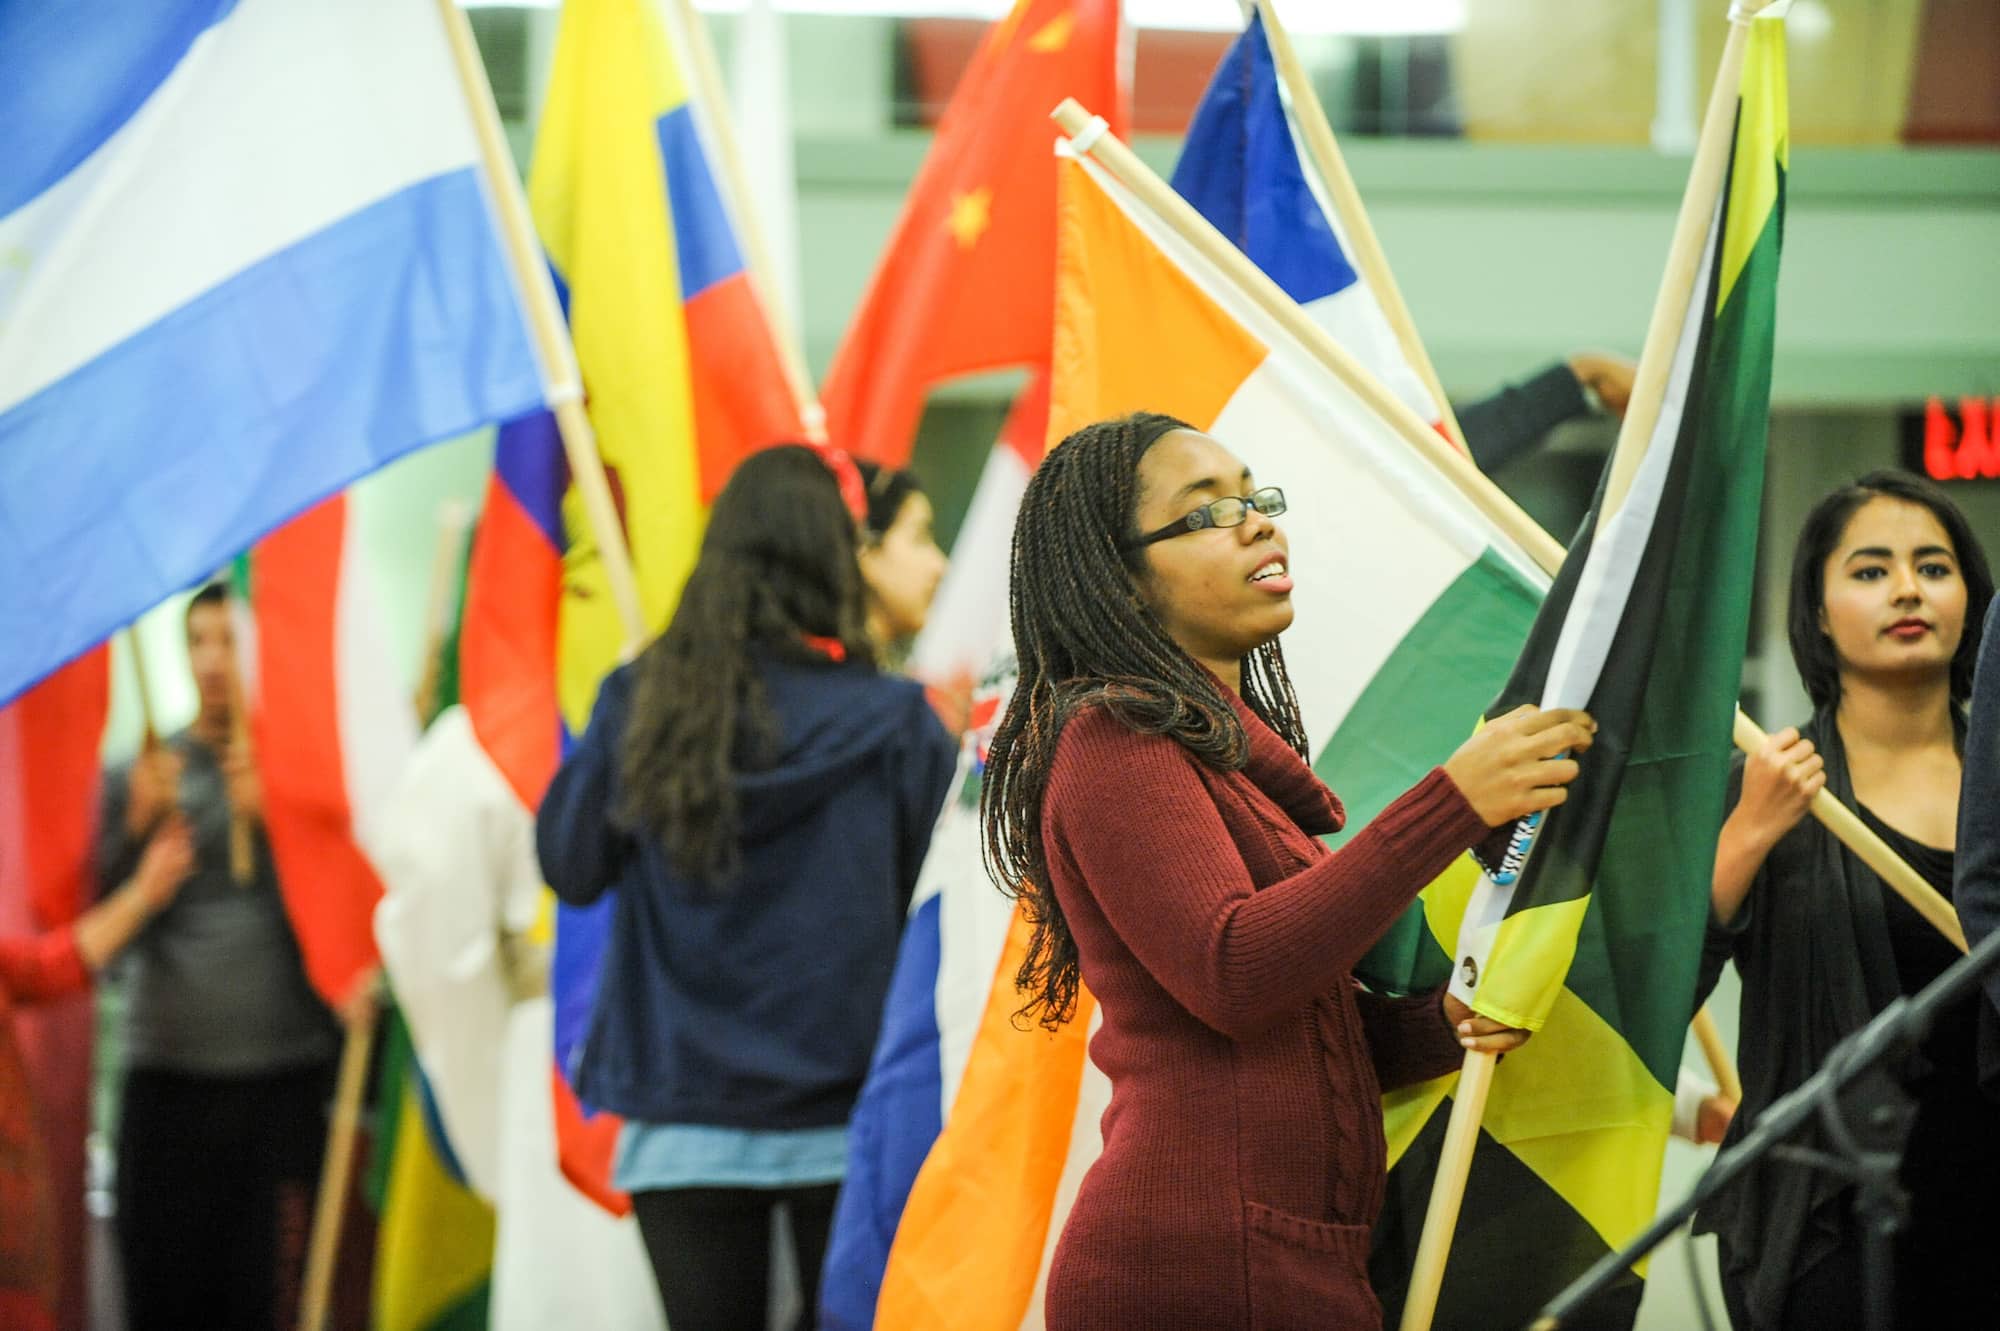 Students carrying flags from different countries